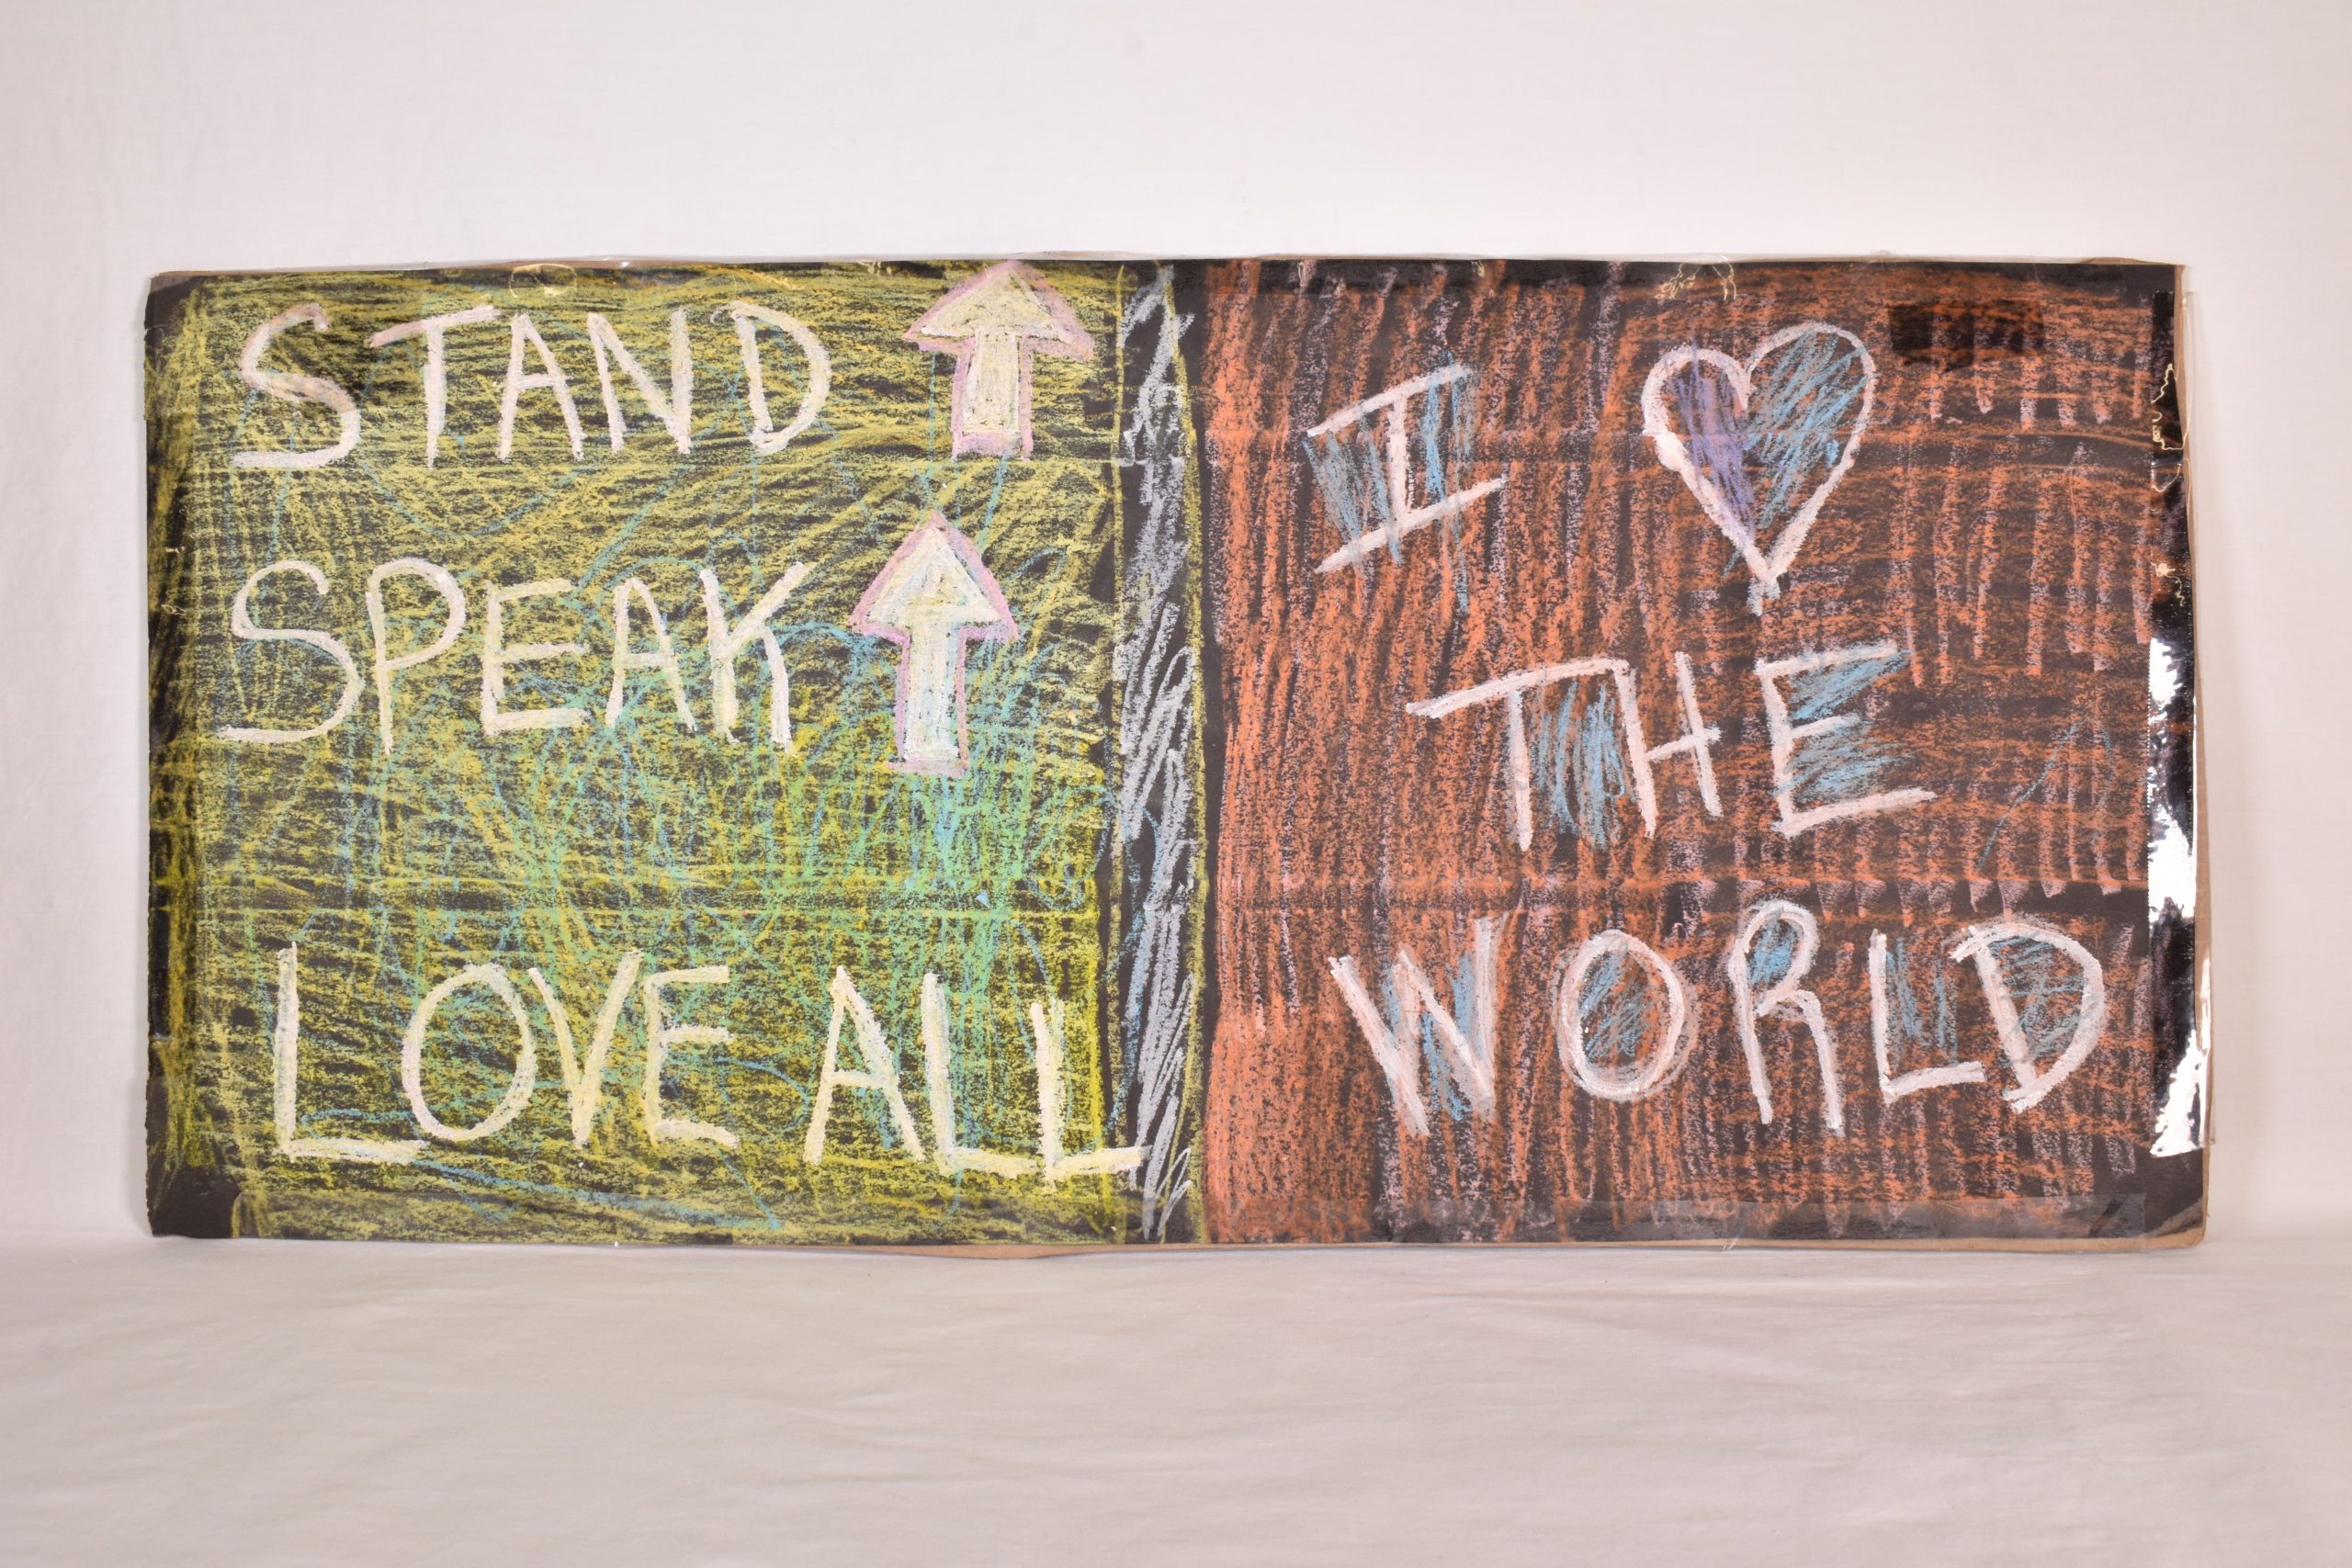 A hand colored sign which reads "Stand up (arrow pointing) Speak (arrow pointing up) Love All I (heart) the World